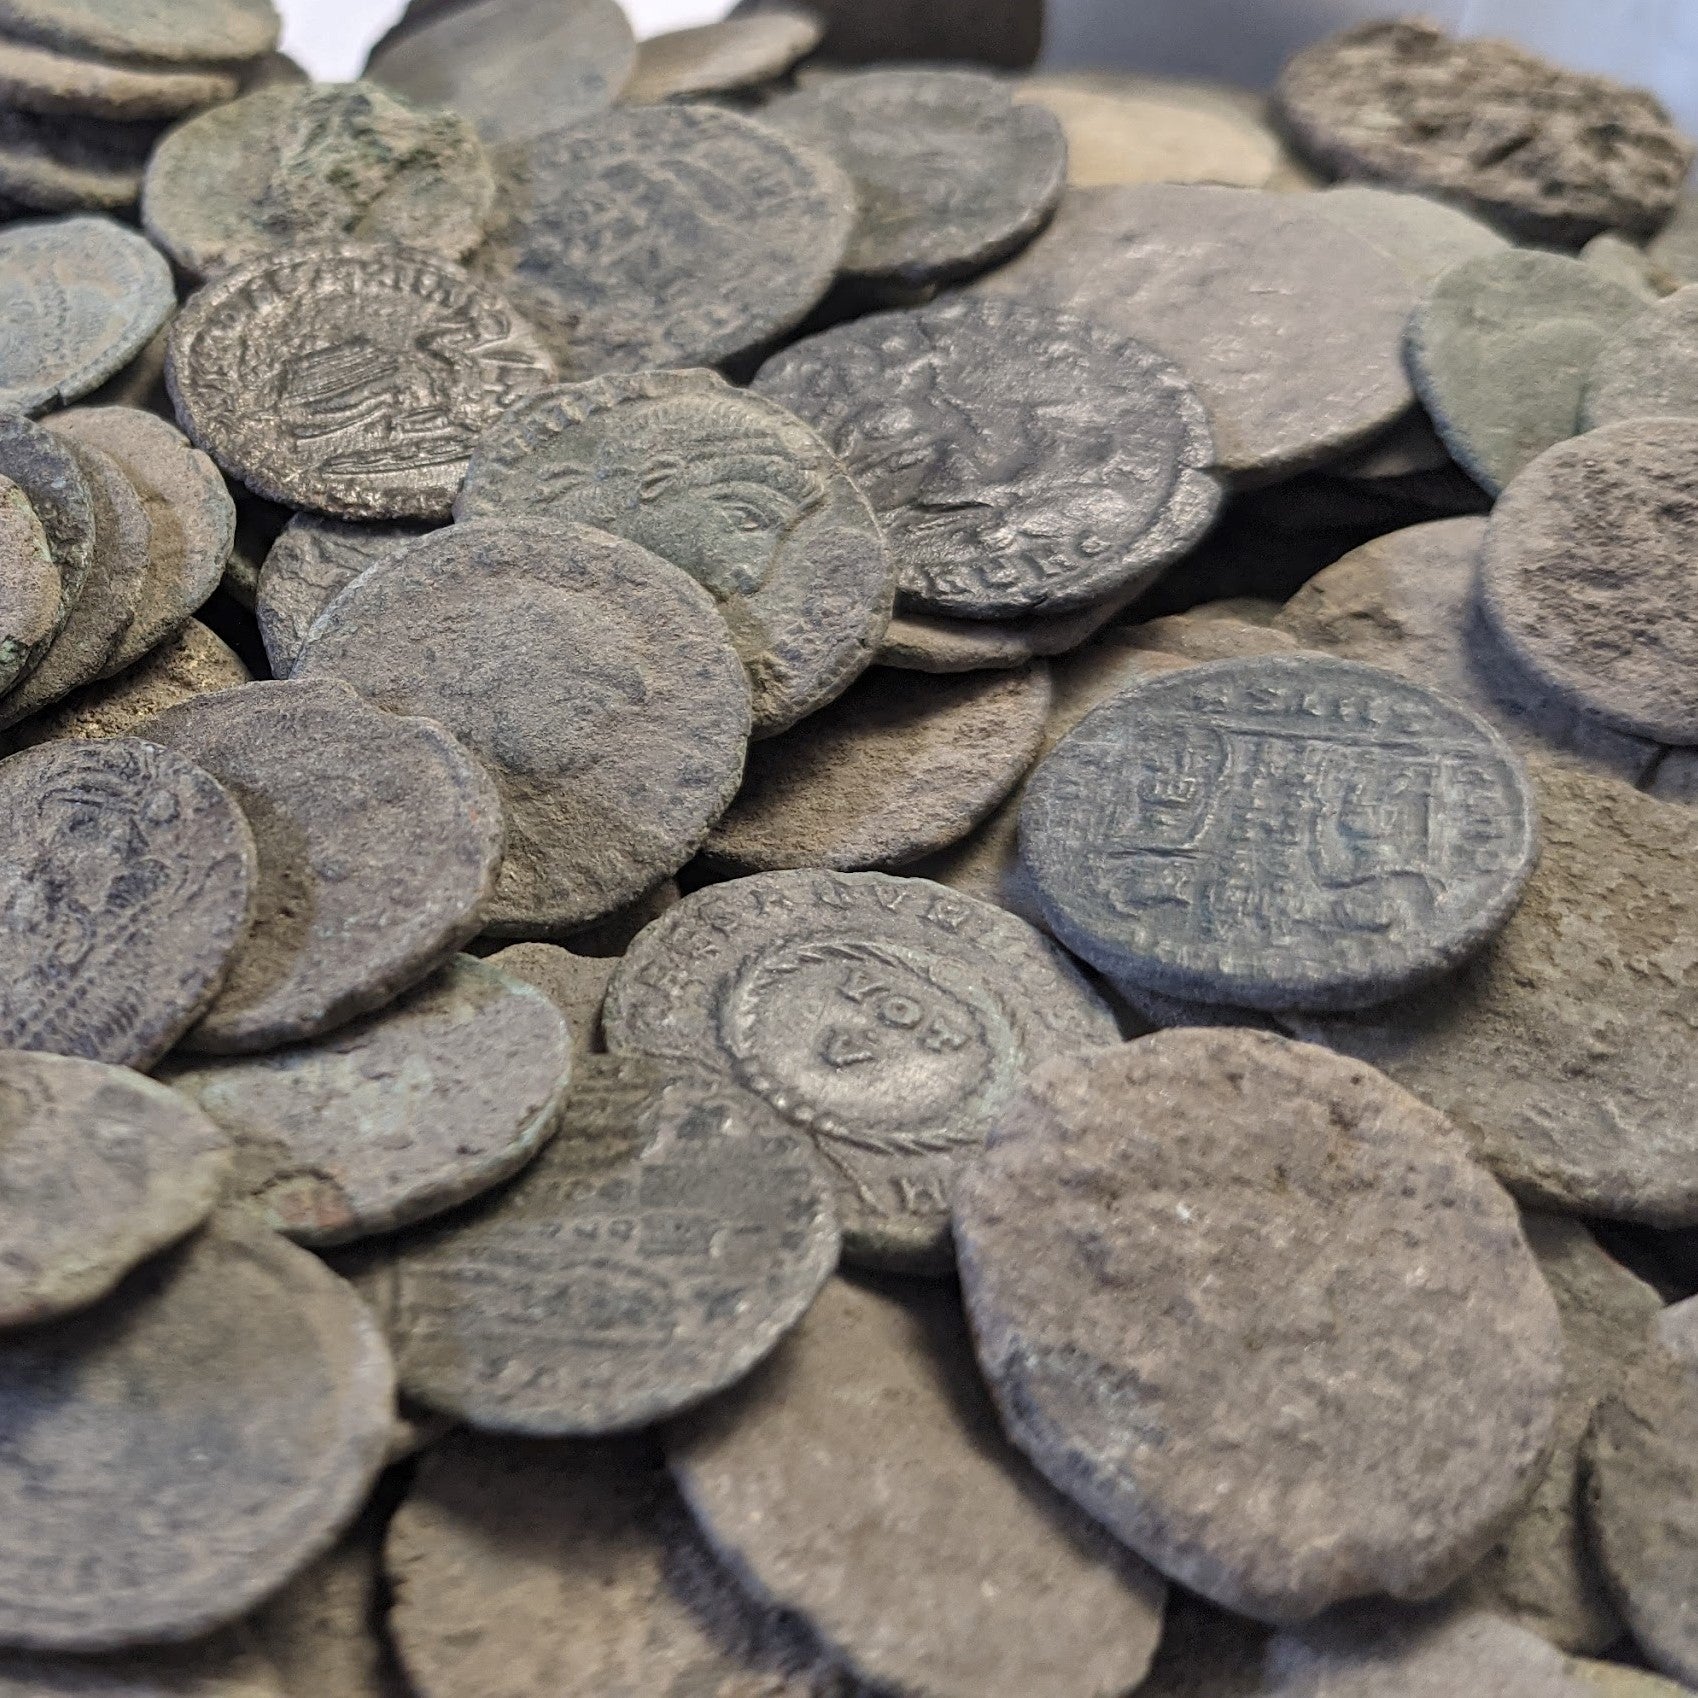 10 Uncleaned Ancient ROMAN BRONZE COINS. Genuine! 1600+ YEARS OLD - Detail Guaranteed - Premium Ancient Coins - Lot